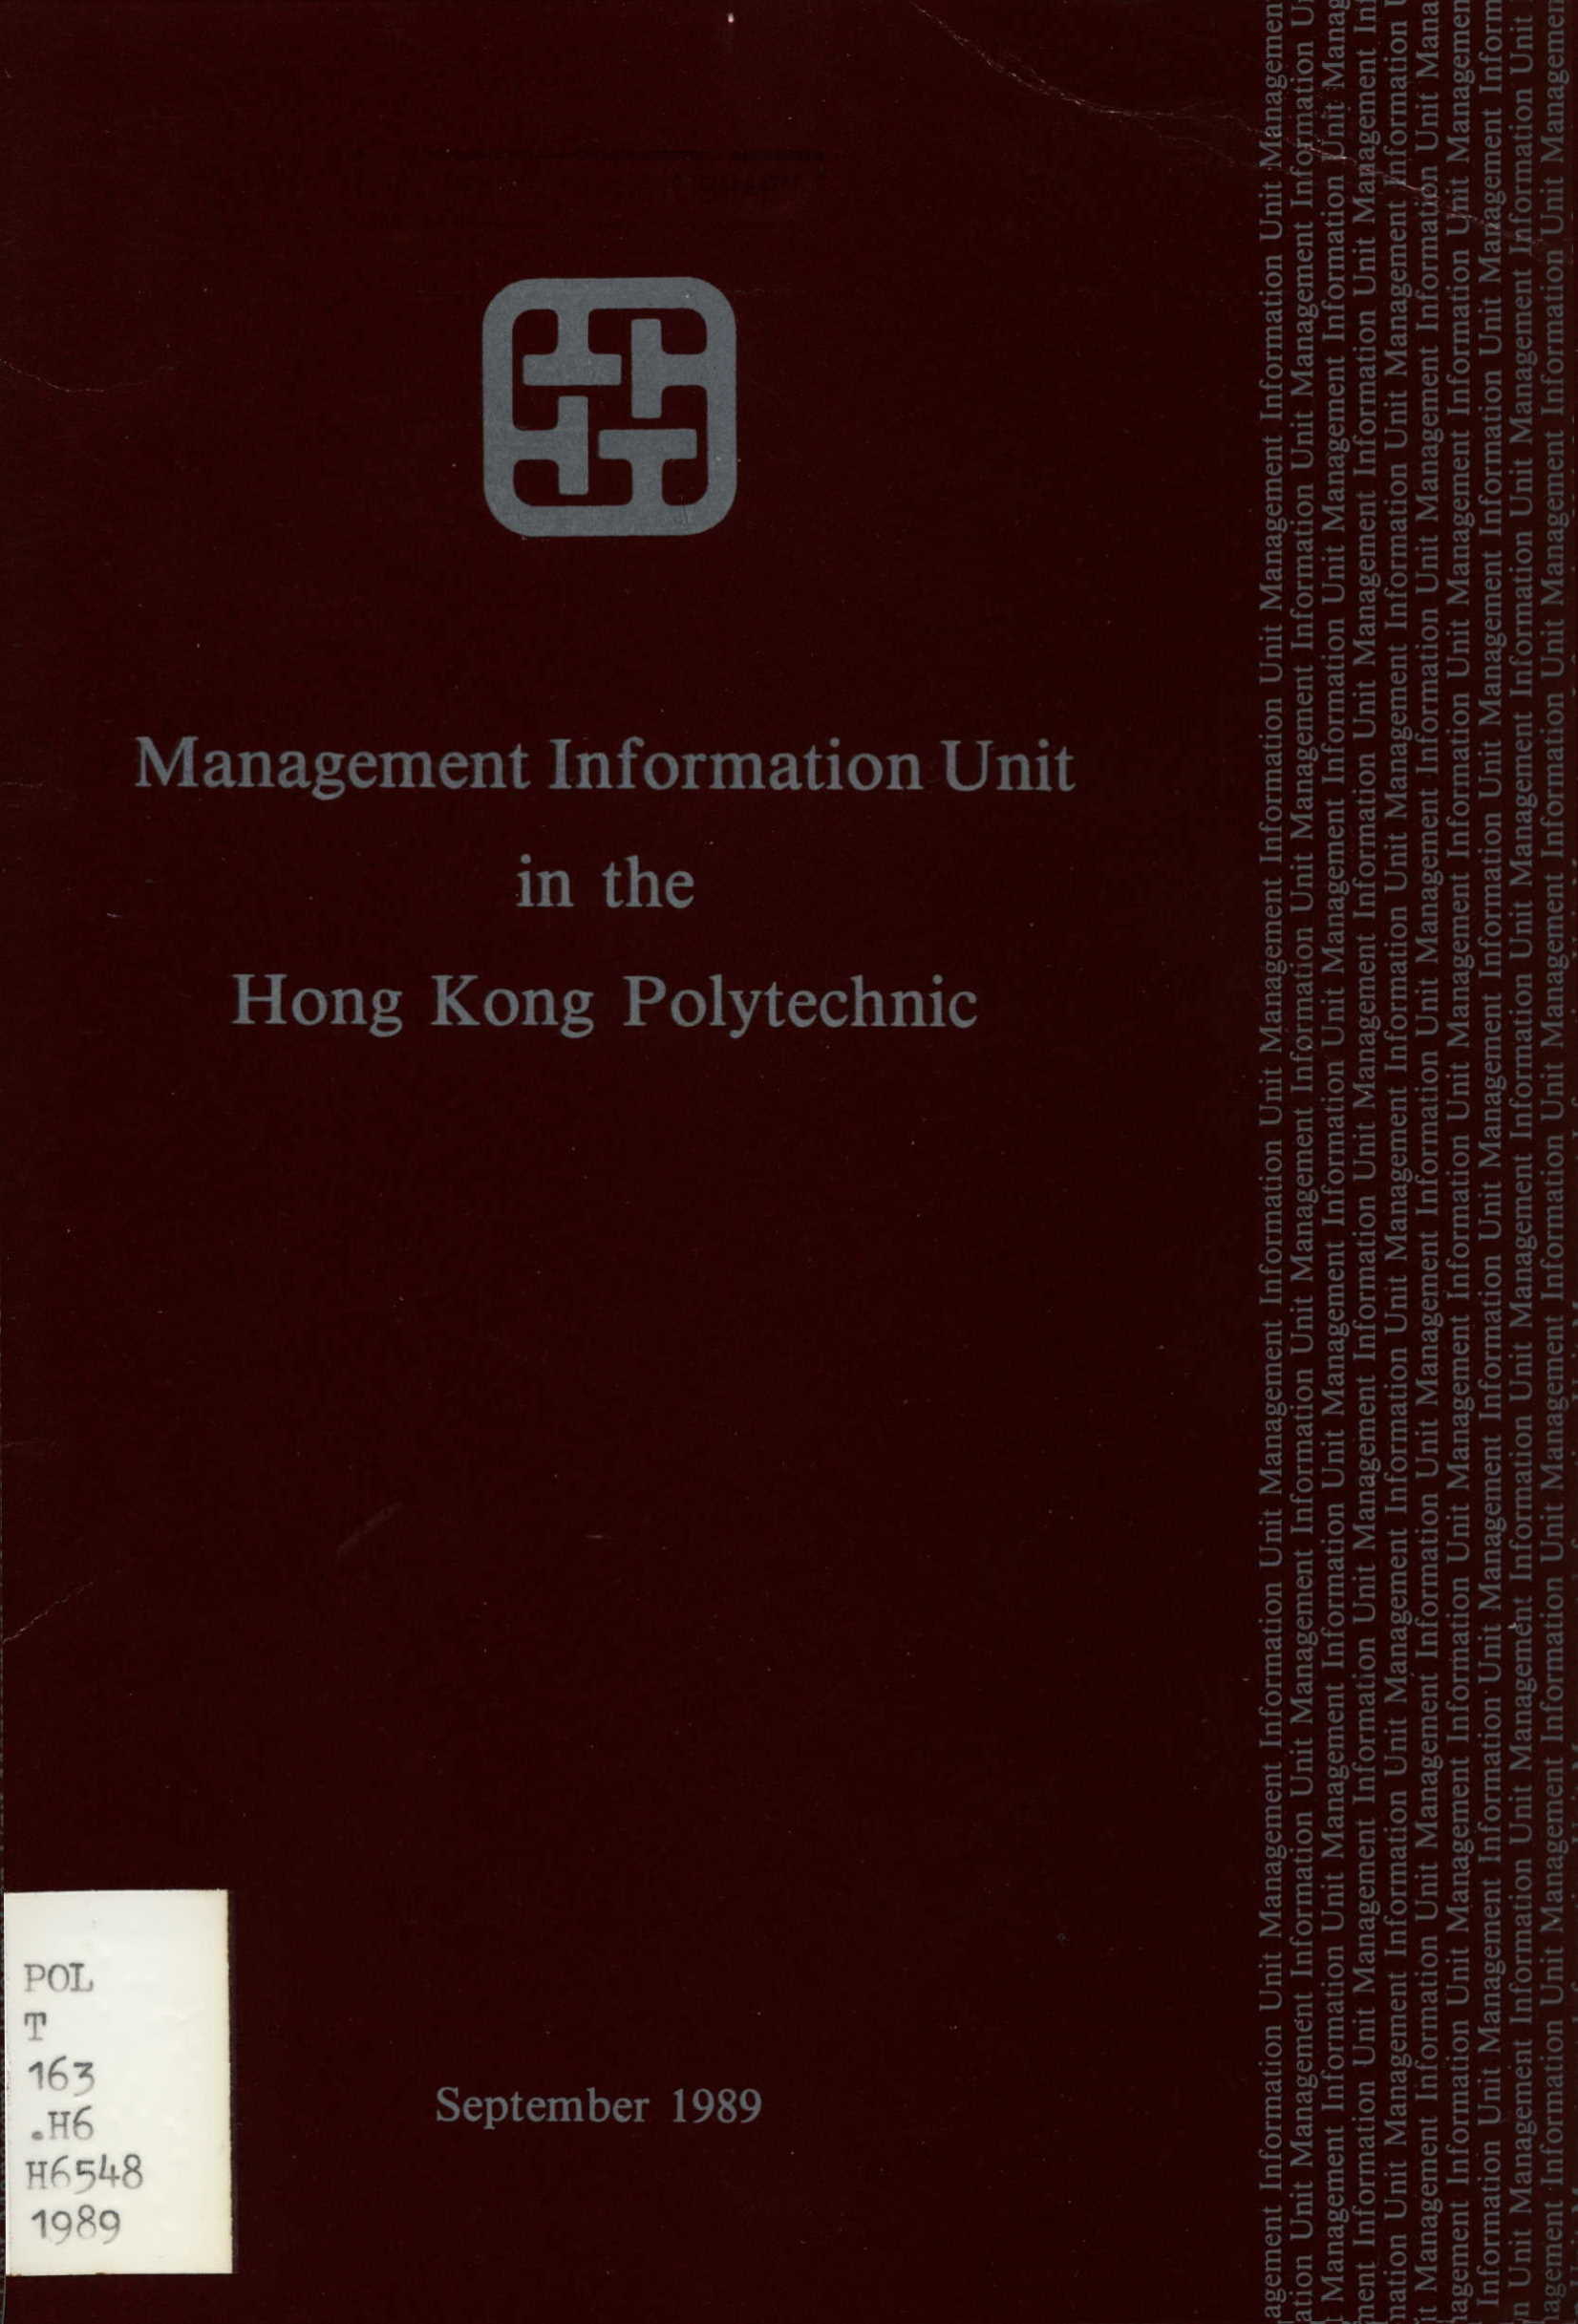 Management Information Unit in the Hong Kong Polytechnic 1989